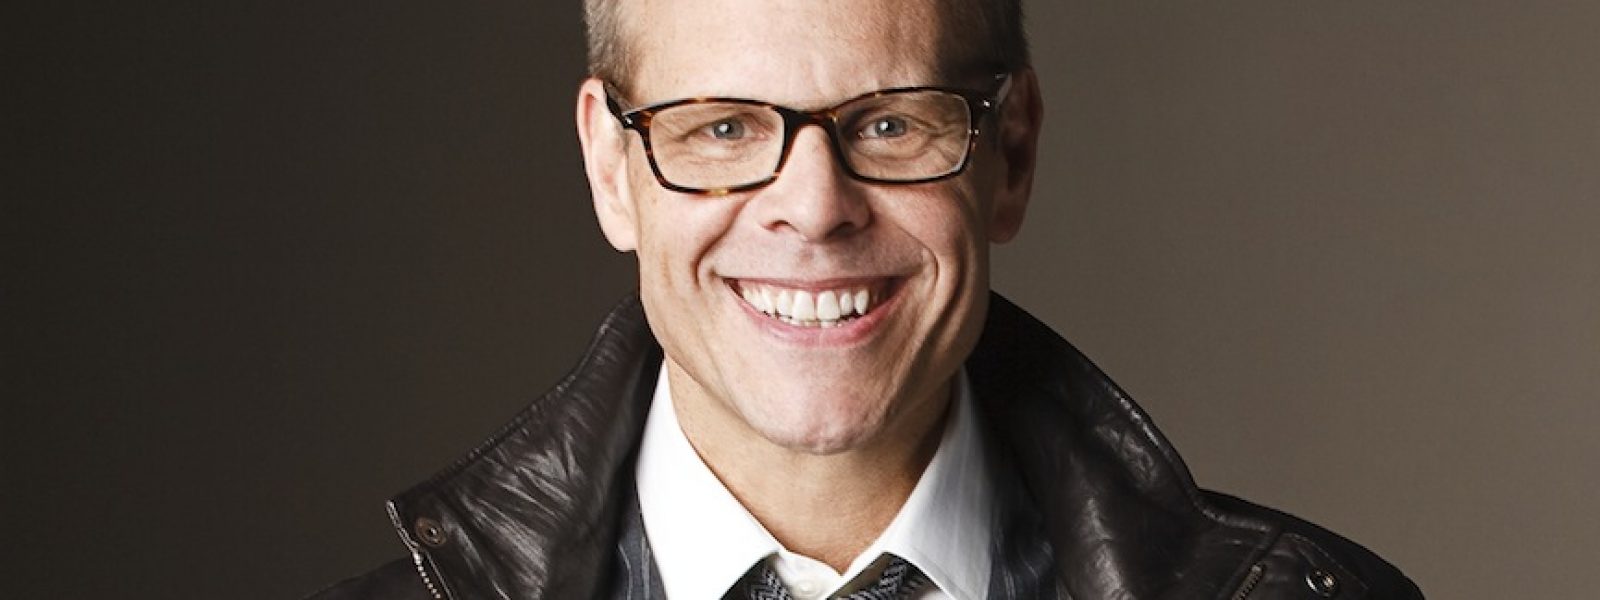 Alton Brown rails against useless one-trick kitchen gadgets in funny video